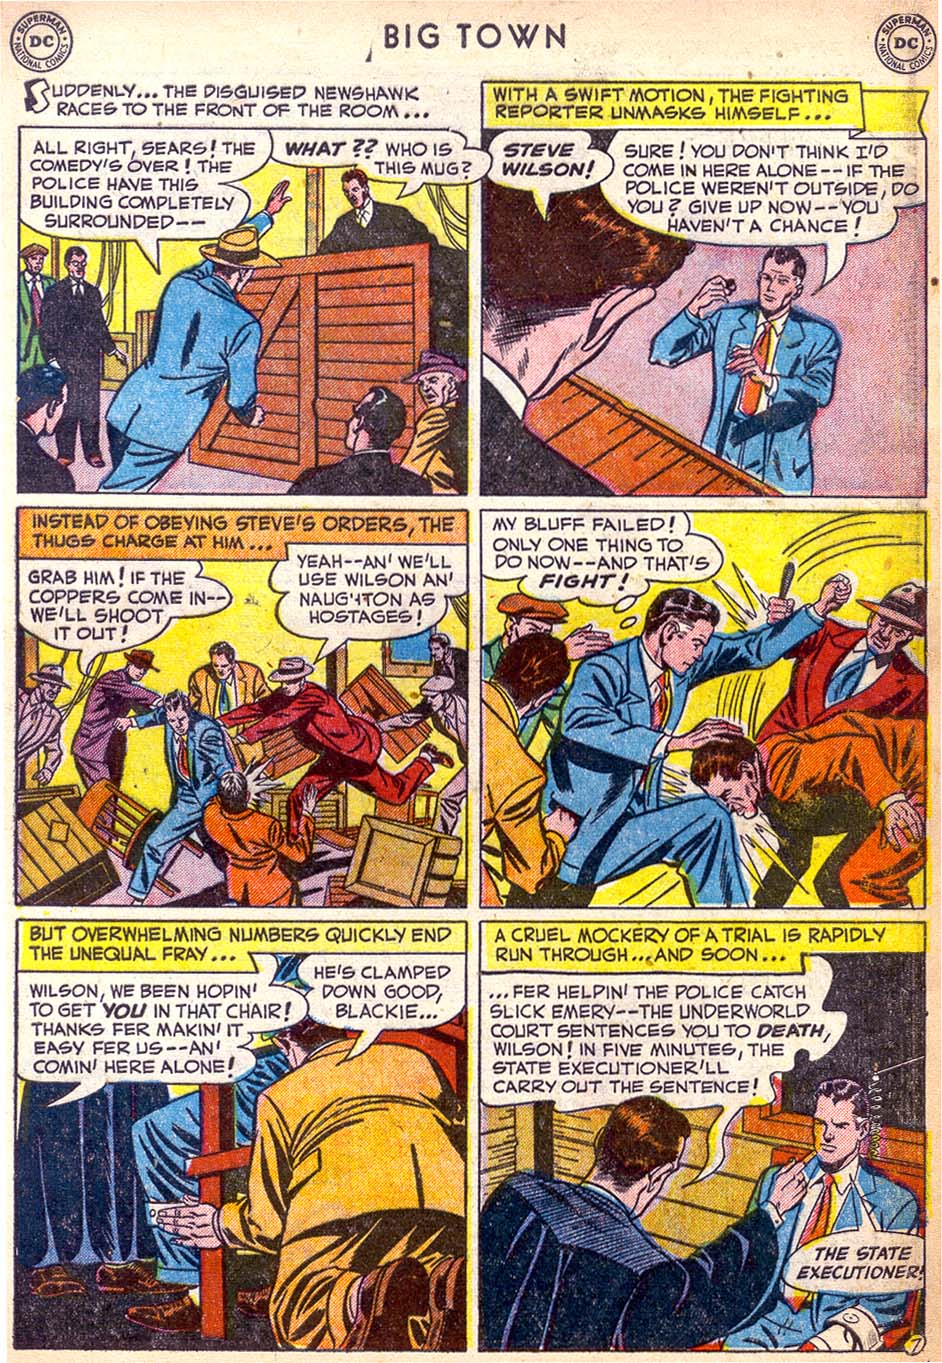 Big Town (1951) 11 Page 8